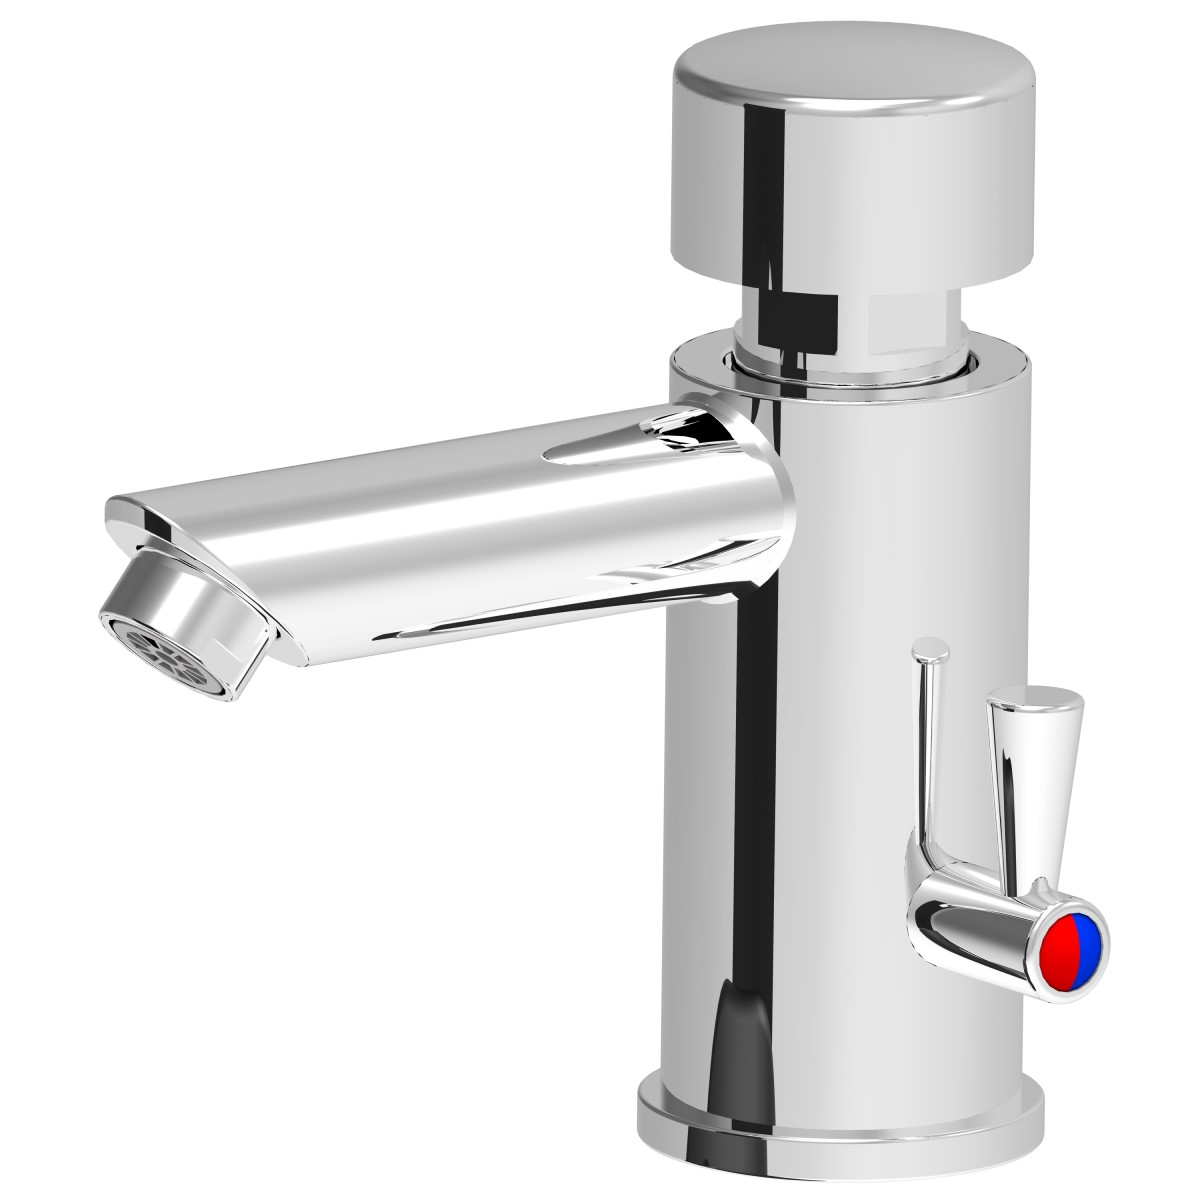 Push-button mixer tap with time control